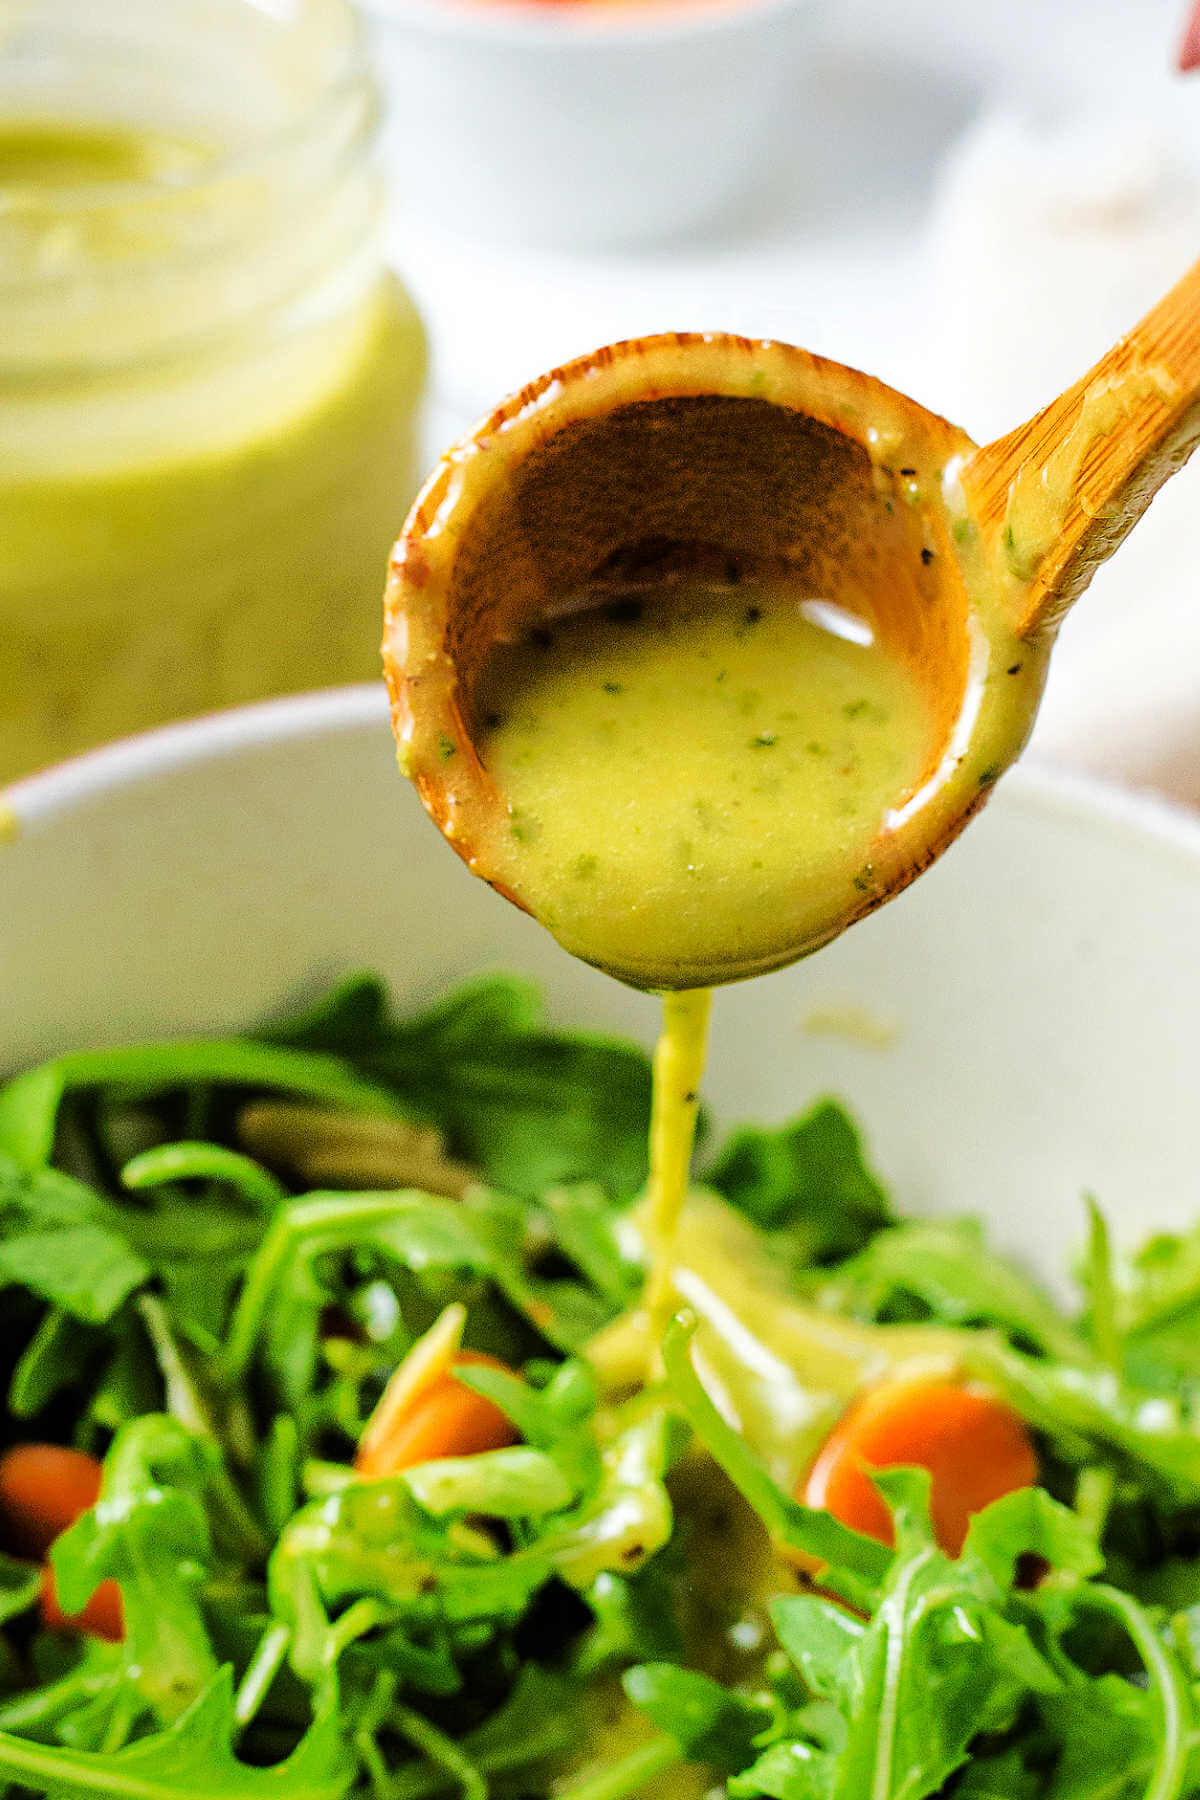 Drizzling lemon basil dressing out of a wooden ladle onto a bowl of greens on a table.